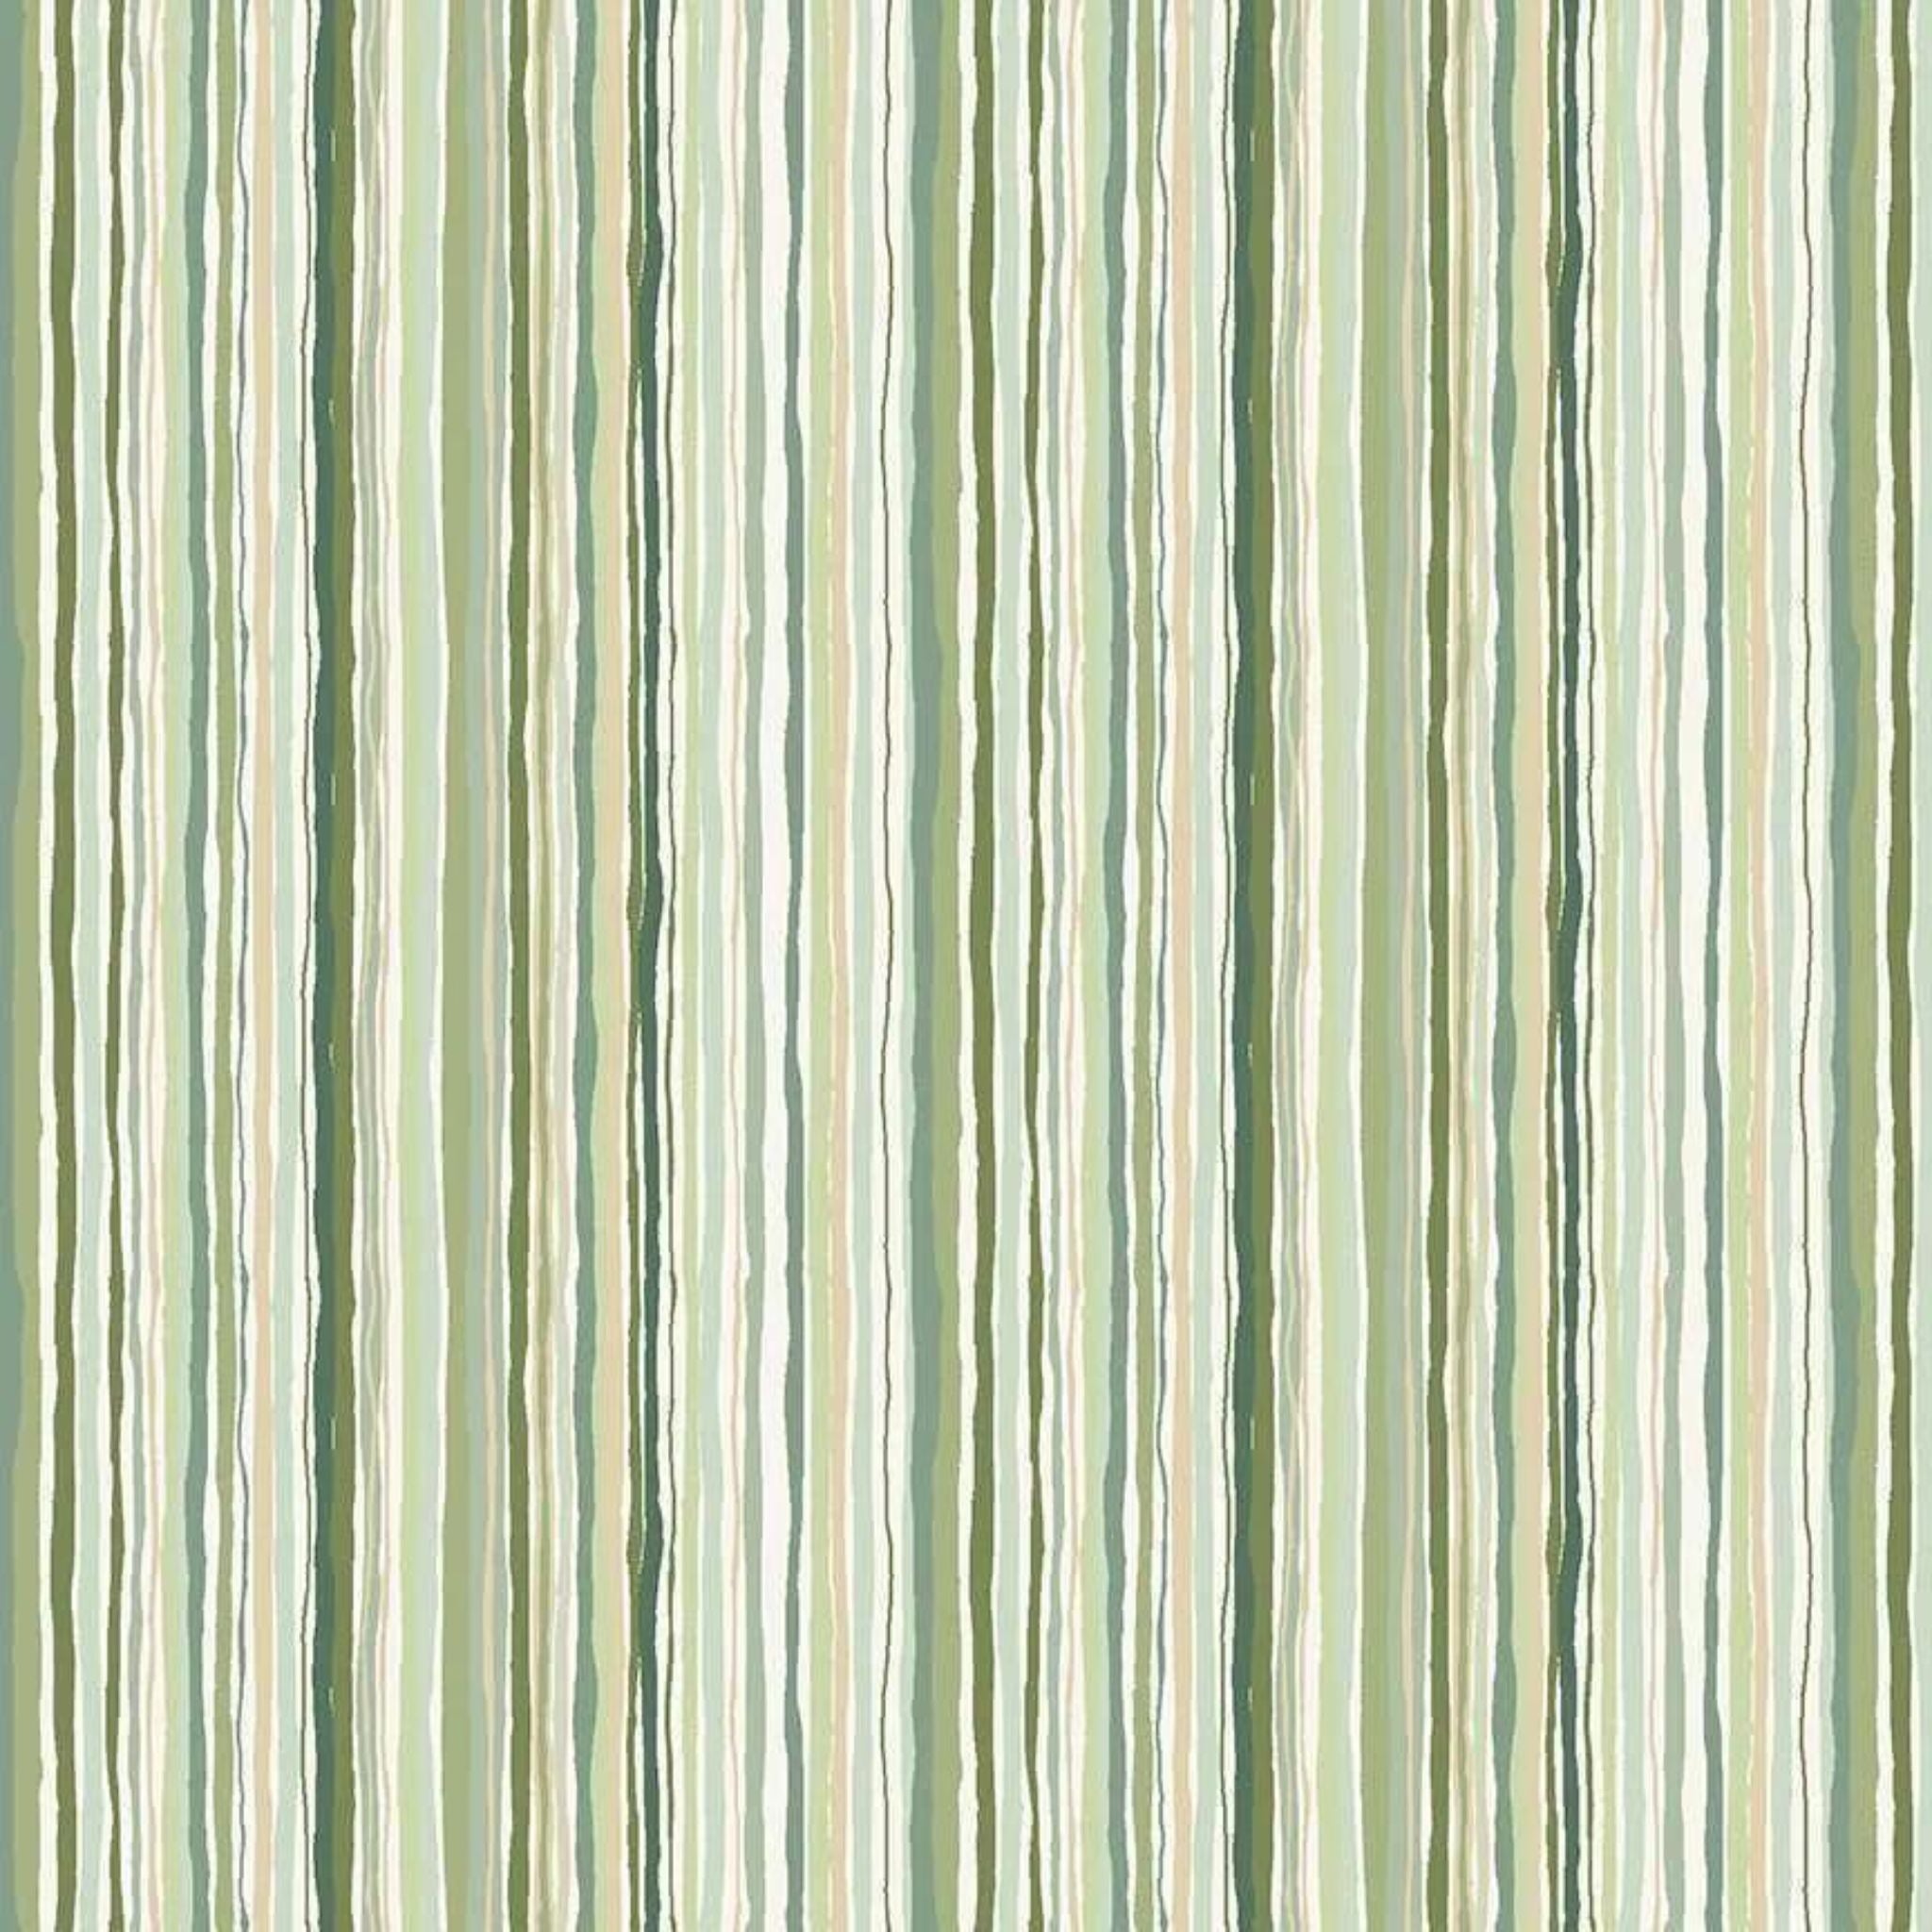 Different coloured green non uniform stripes - Foxwood by Makower